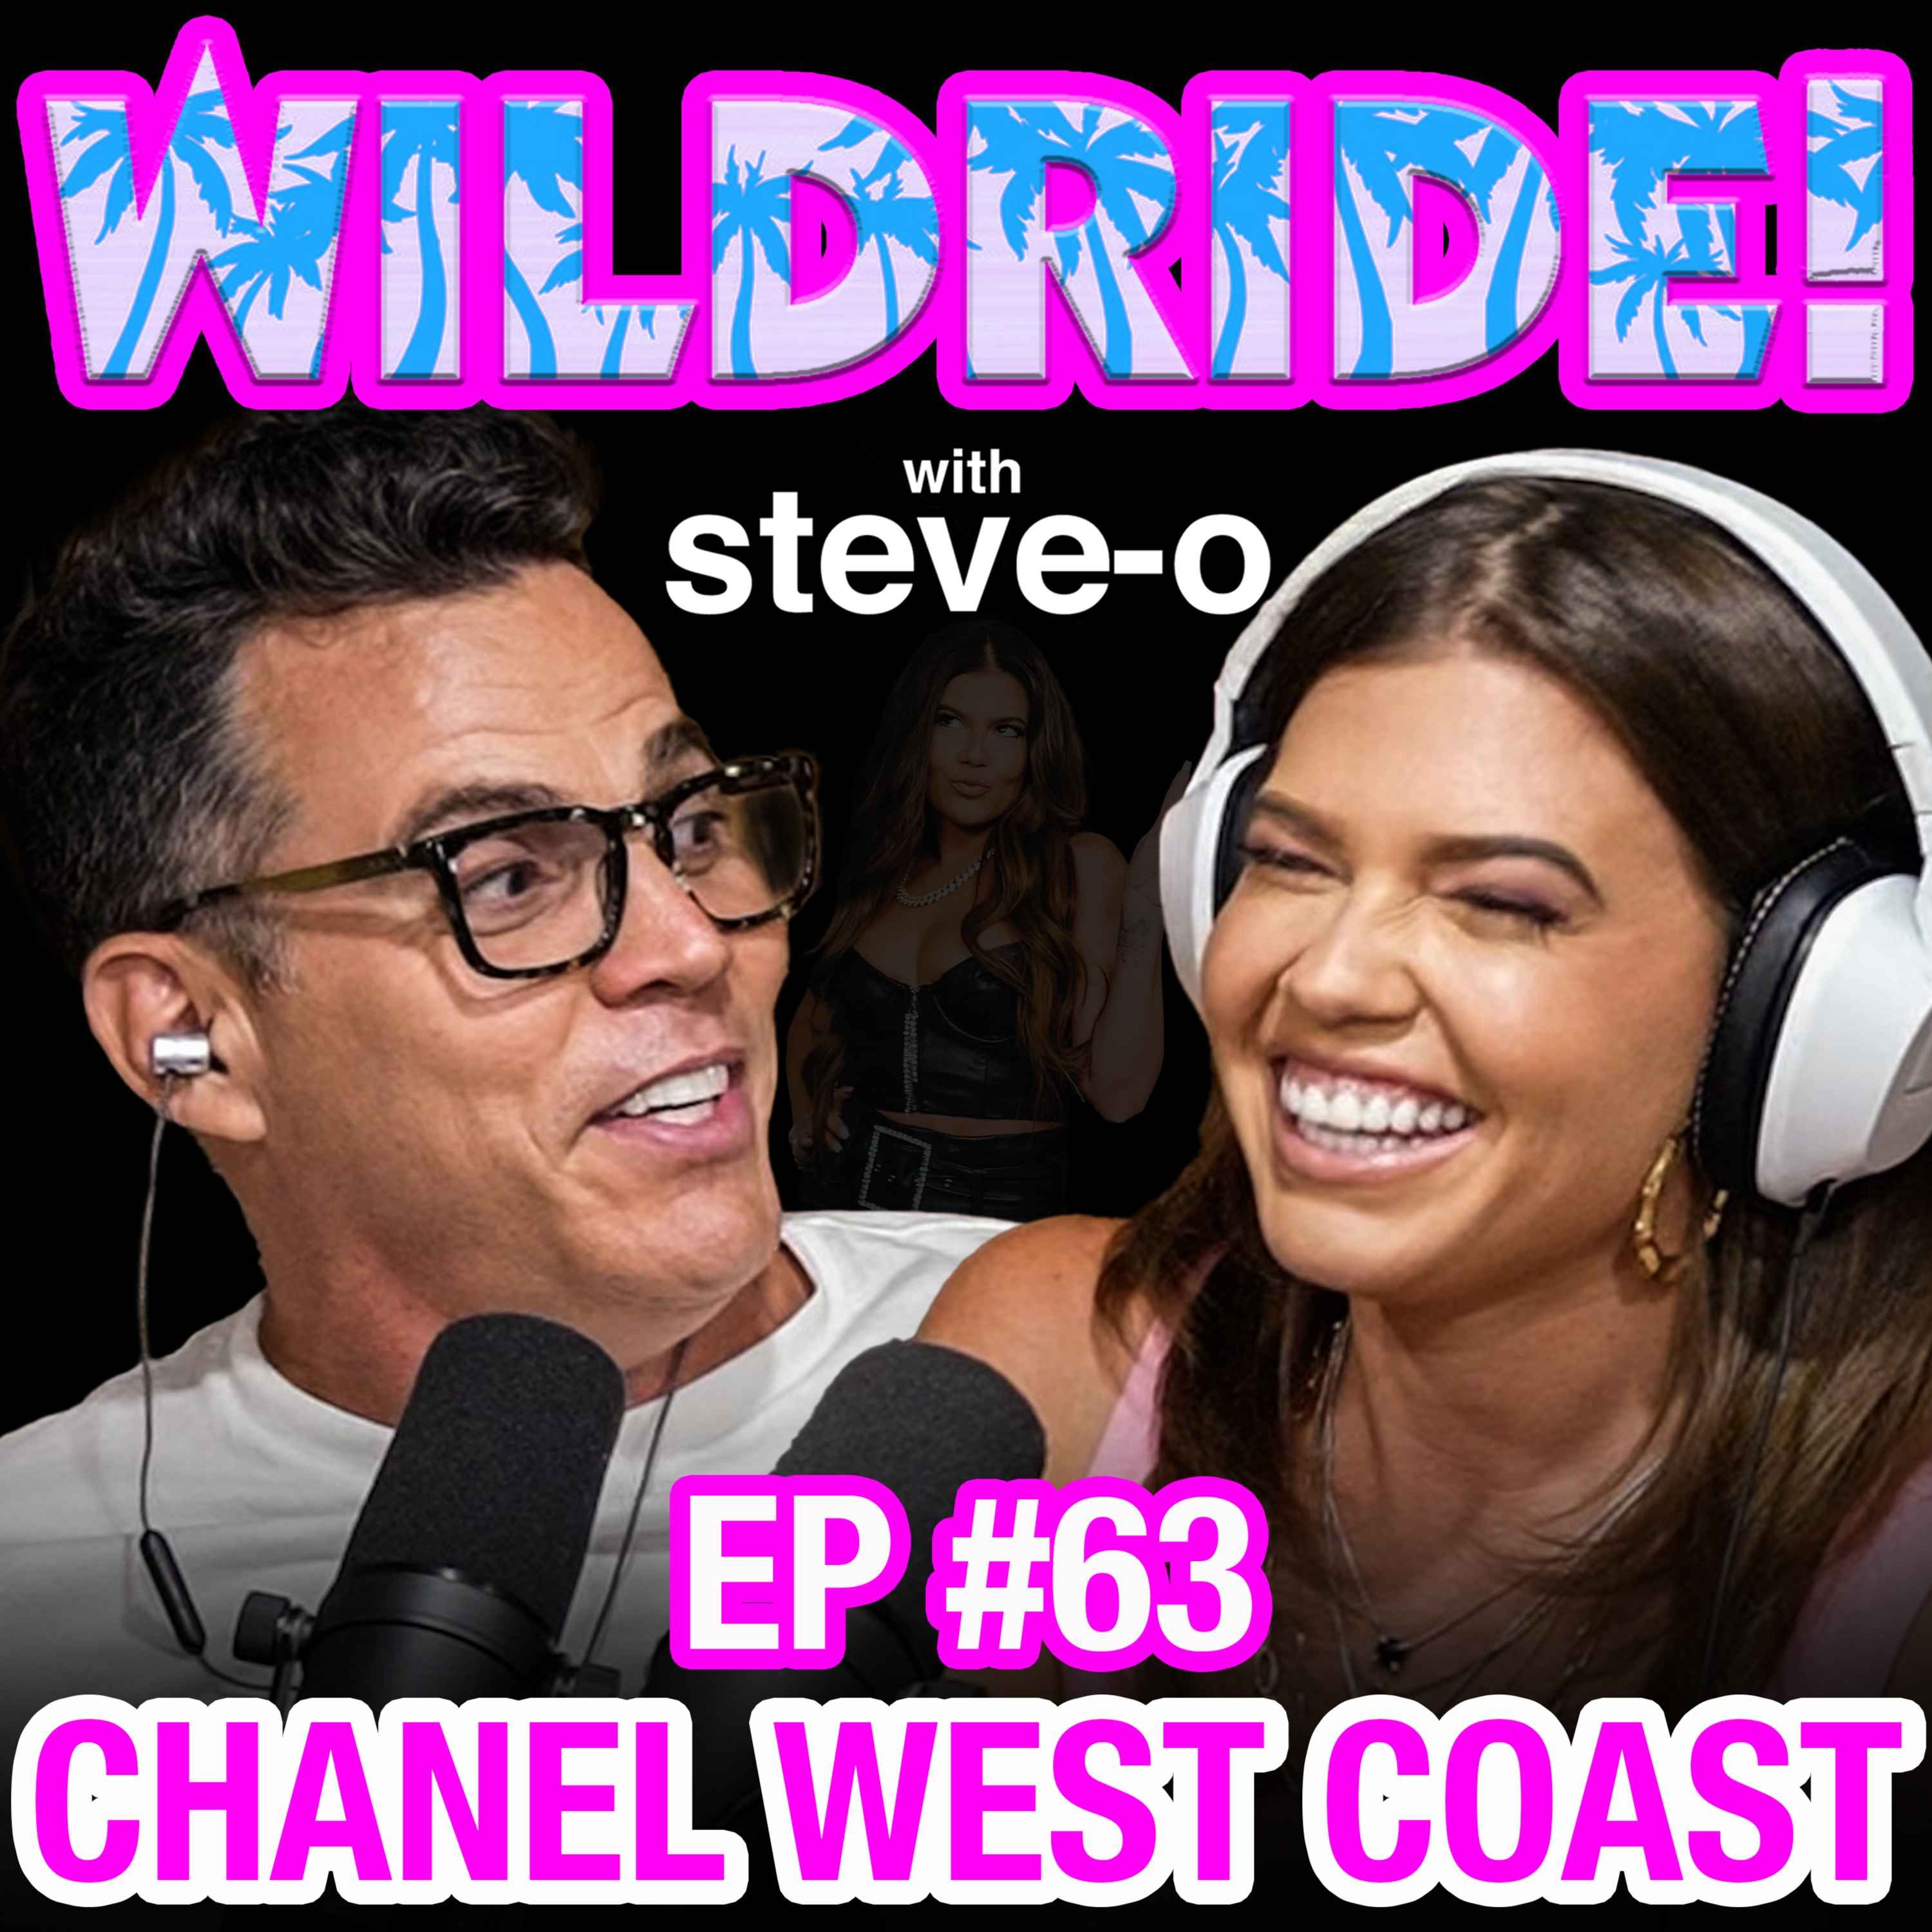 Chanel West Coast Gets Drilled - Chanel West Coast â€“ Wild Ride! with Steve-O â€“ Podcast â€“ Podtail